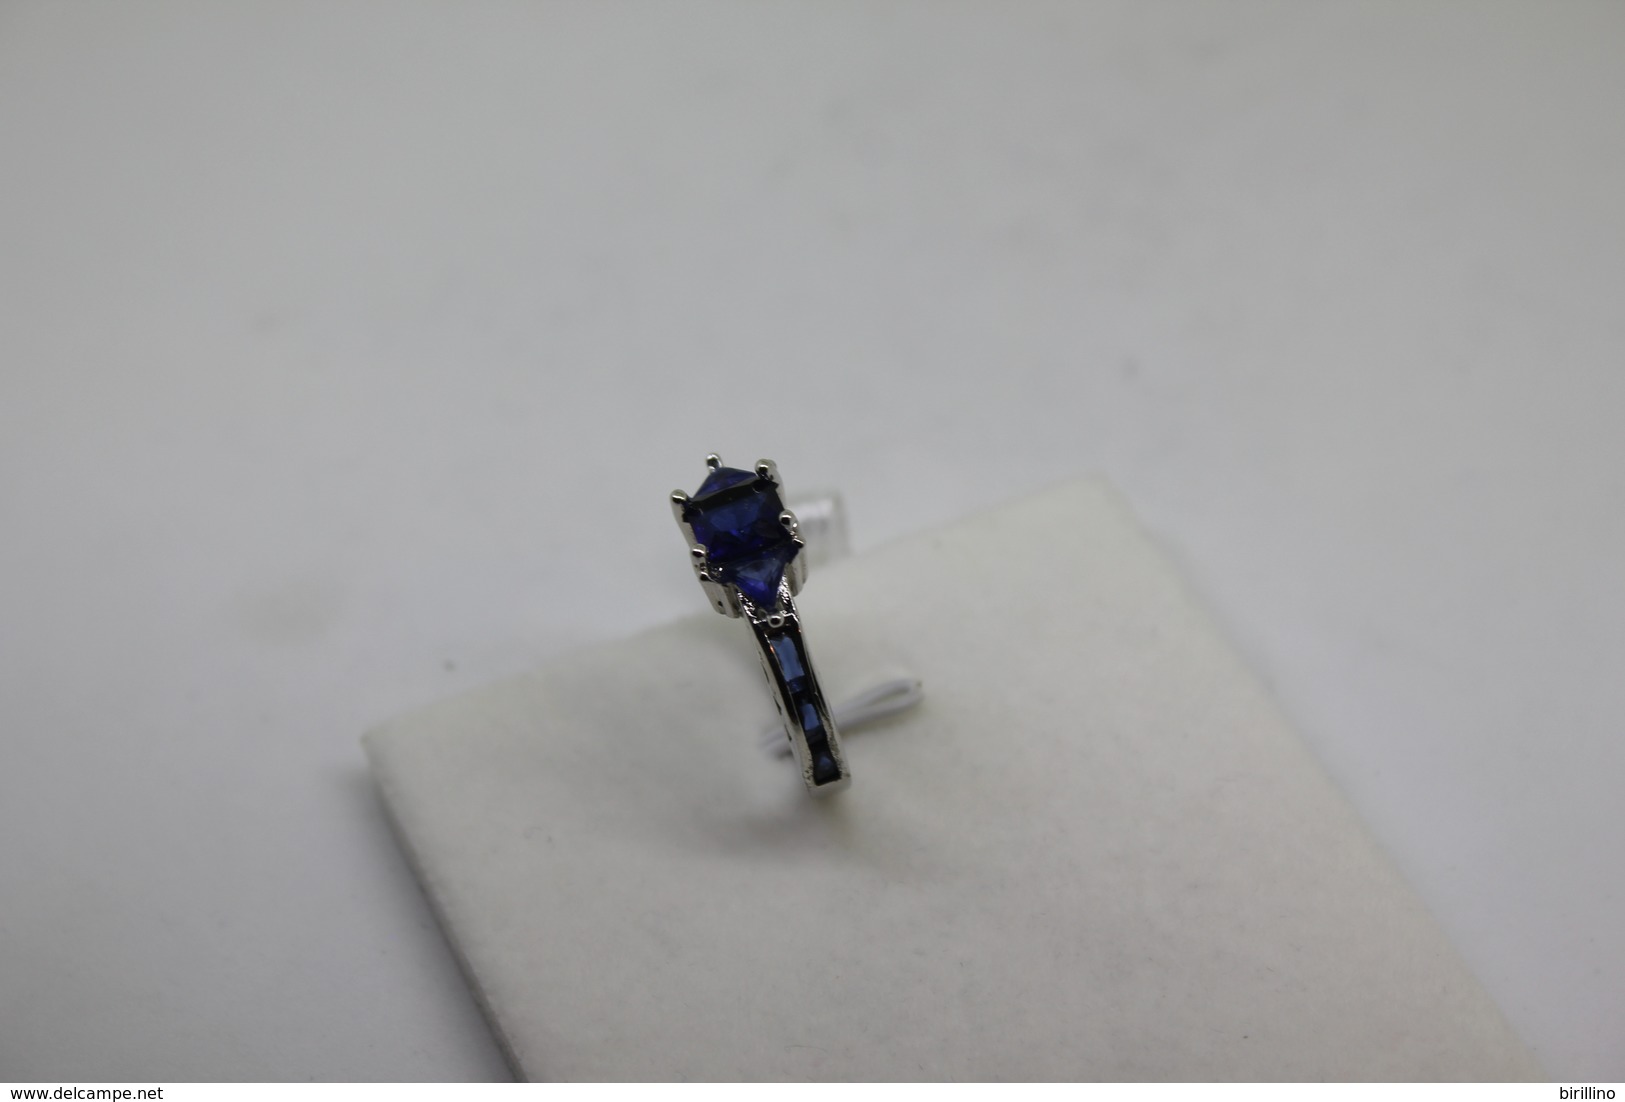 A60033/1 - Anello In Argento Sterling Pietre Blue - Misura 6 - Rings